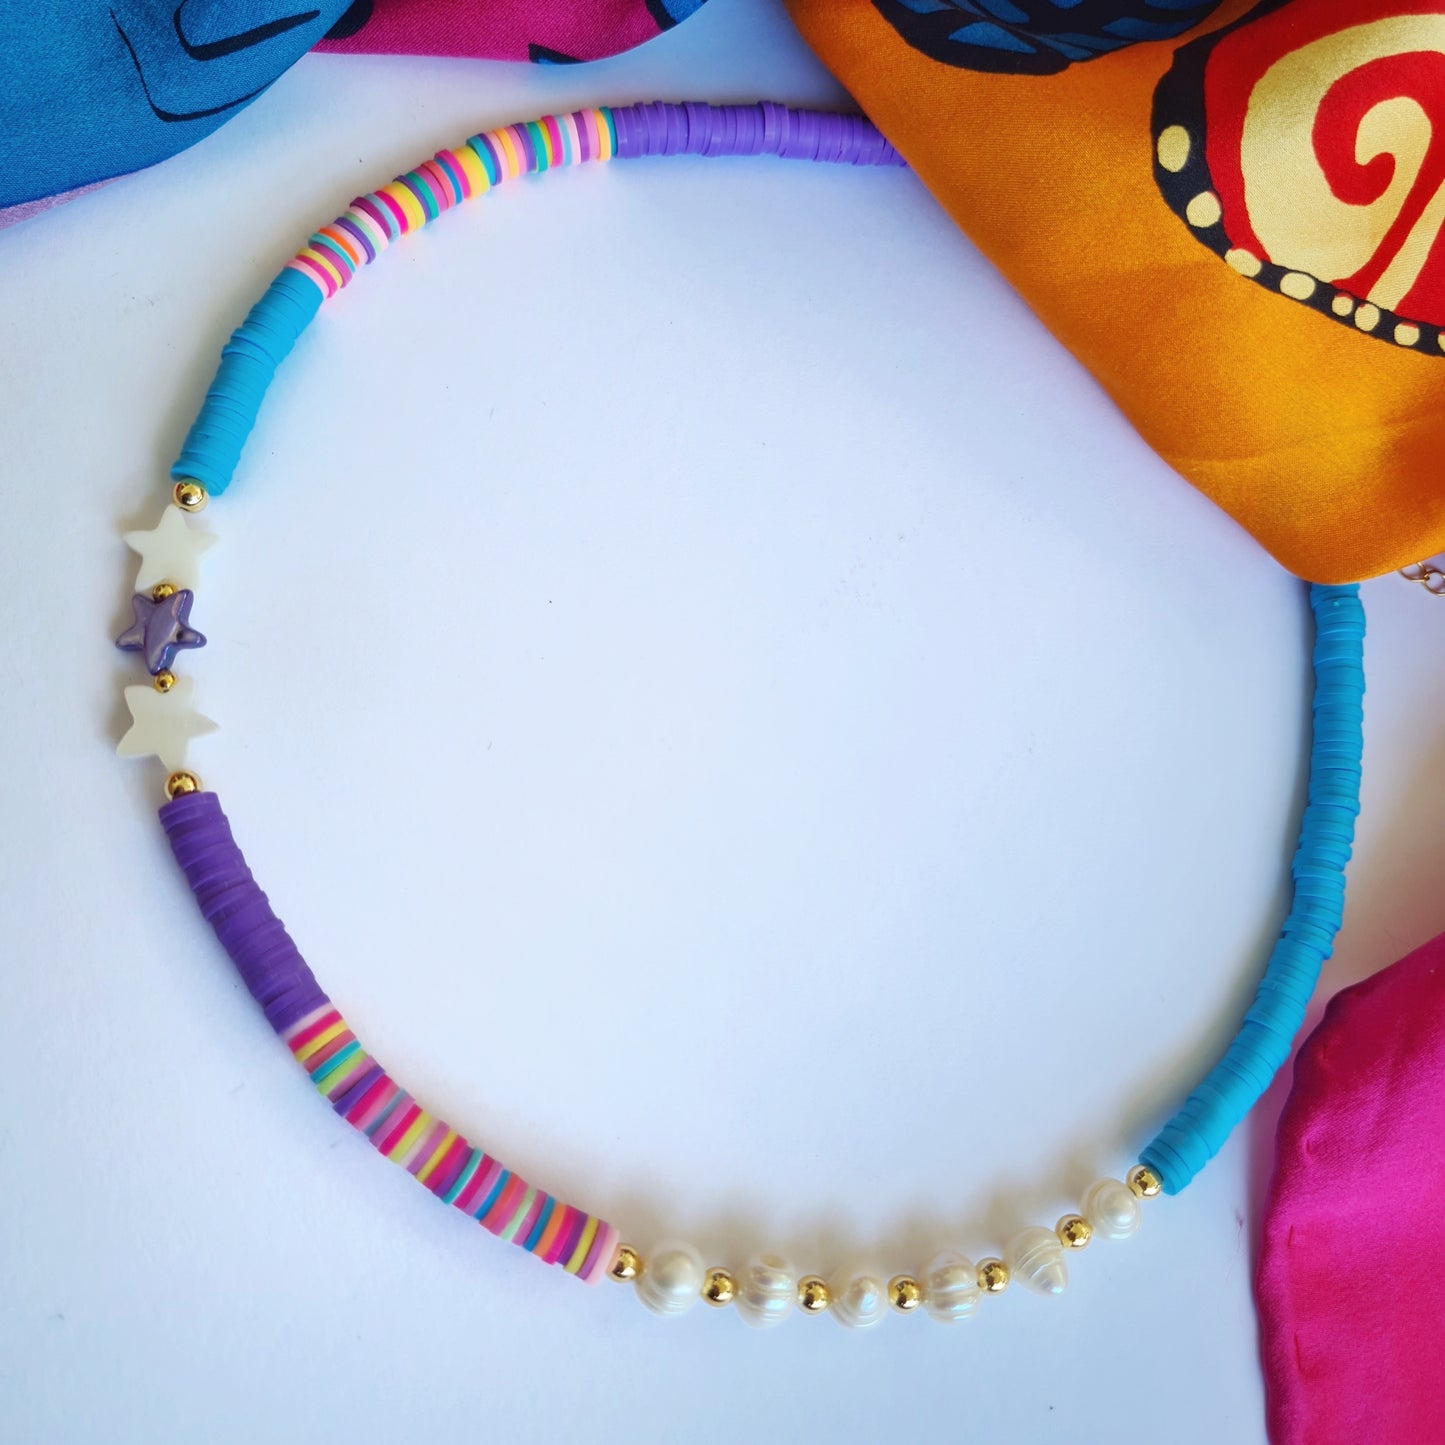 Surfer beads "Sophie"necklace